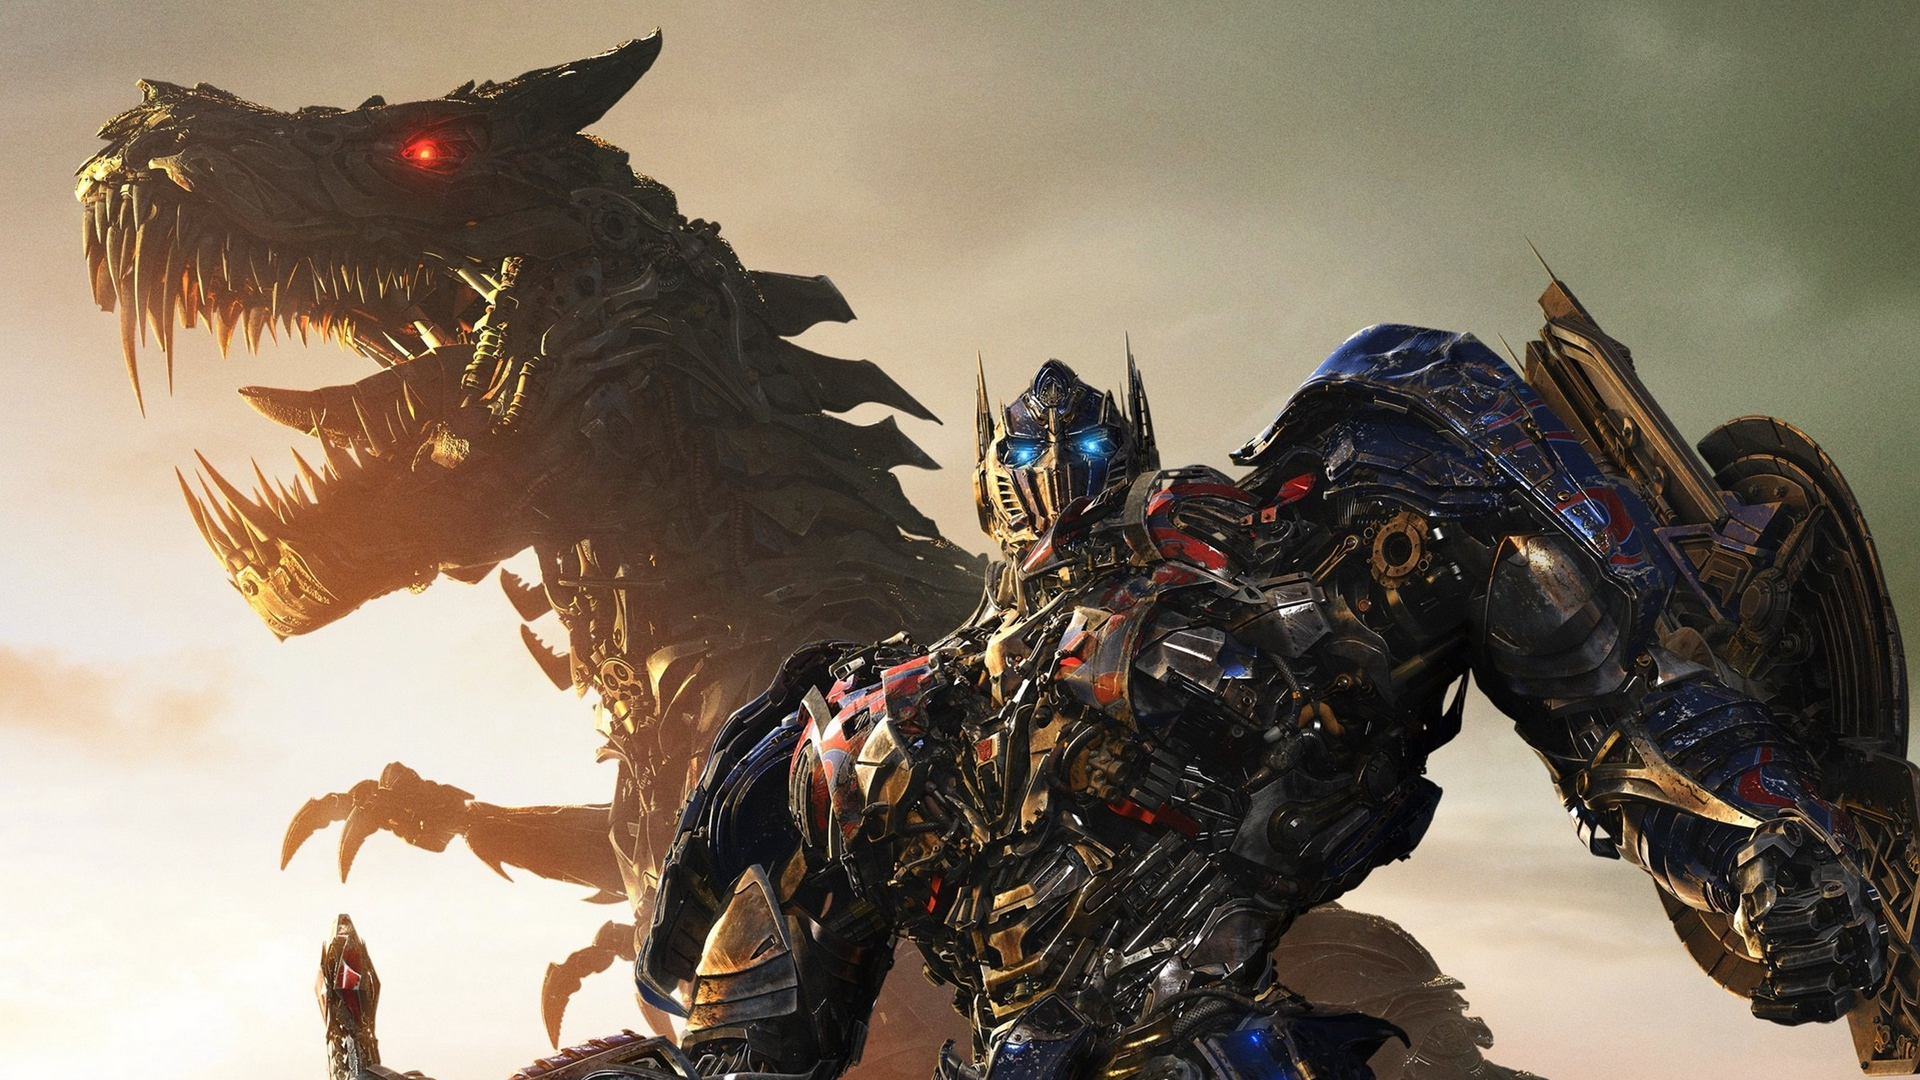 Download wallpaper 1920x1080 transformers age of extinction, optimus prime, transformers full hd,. Transformers age, Transformers age of extinction, Transformers